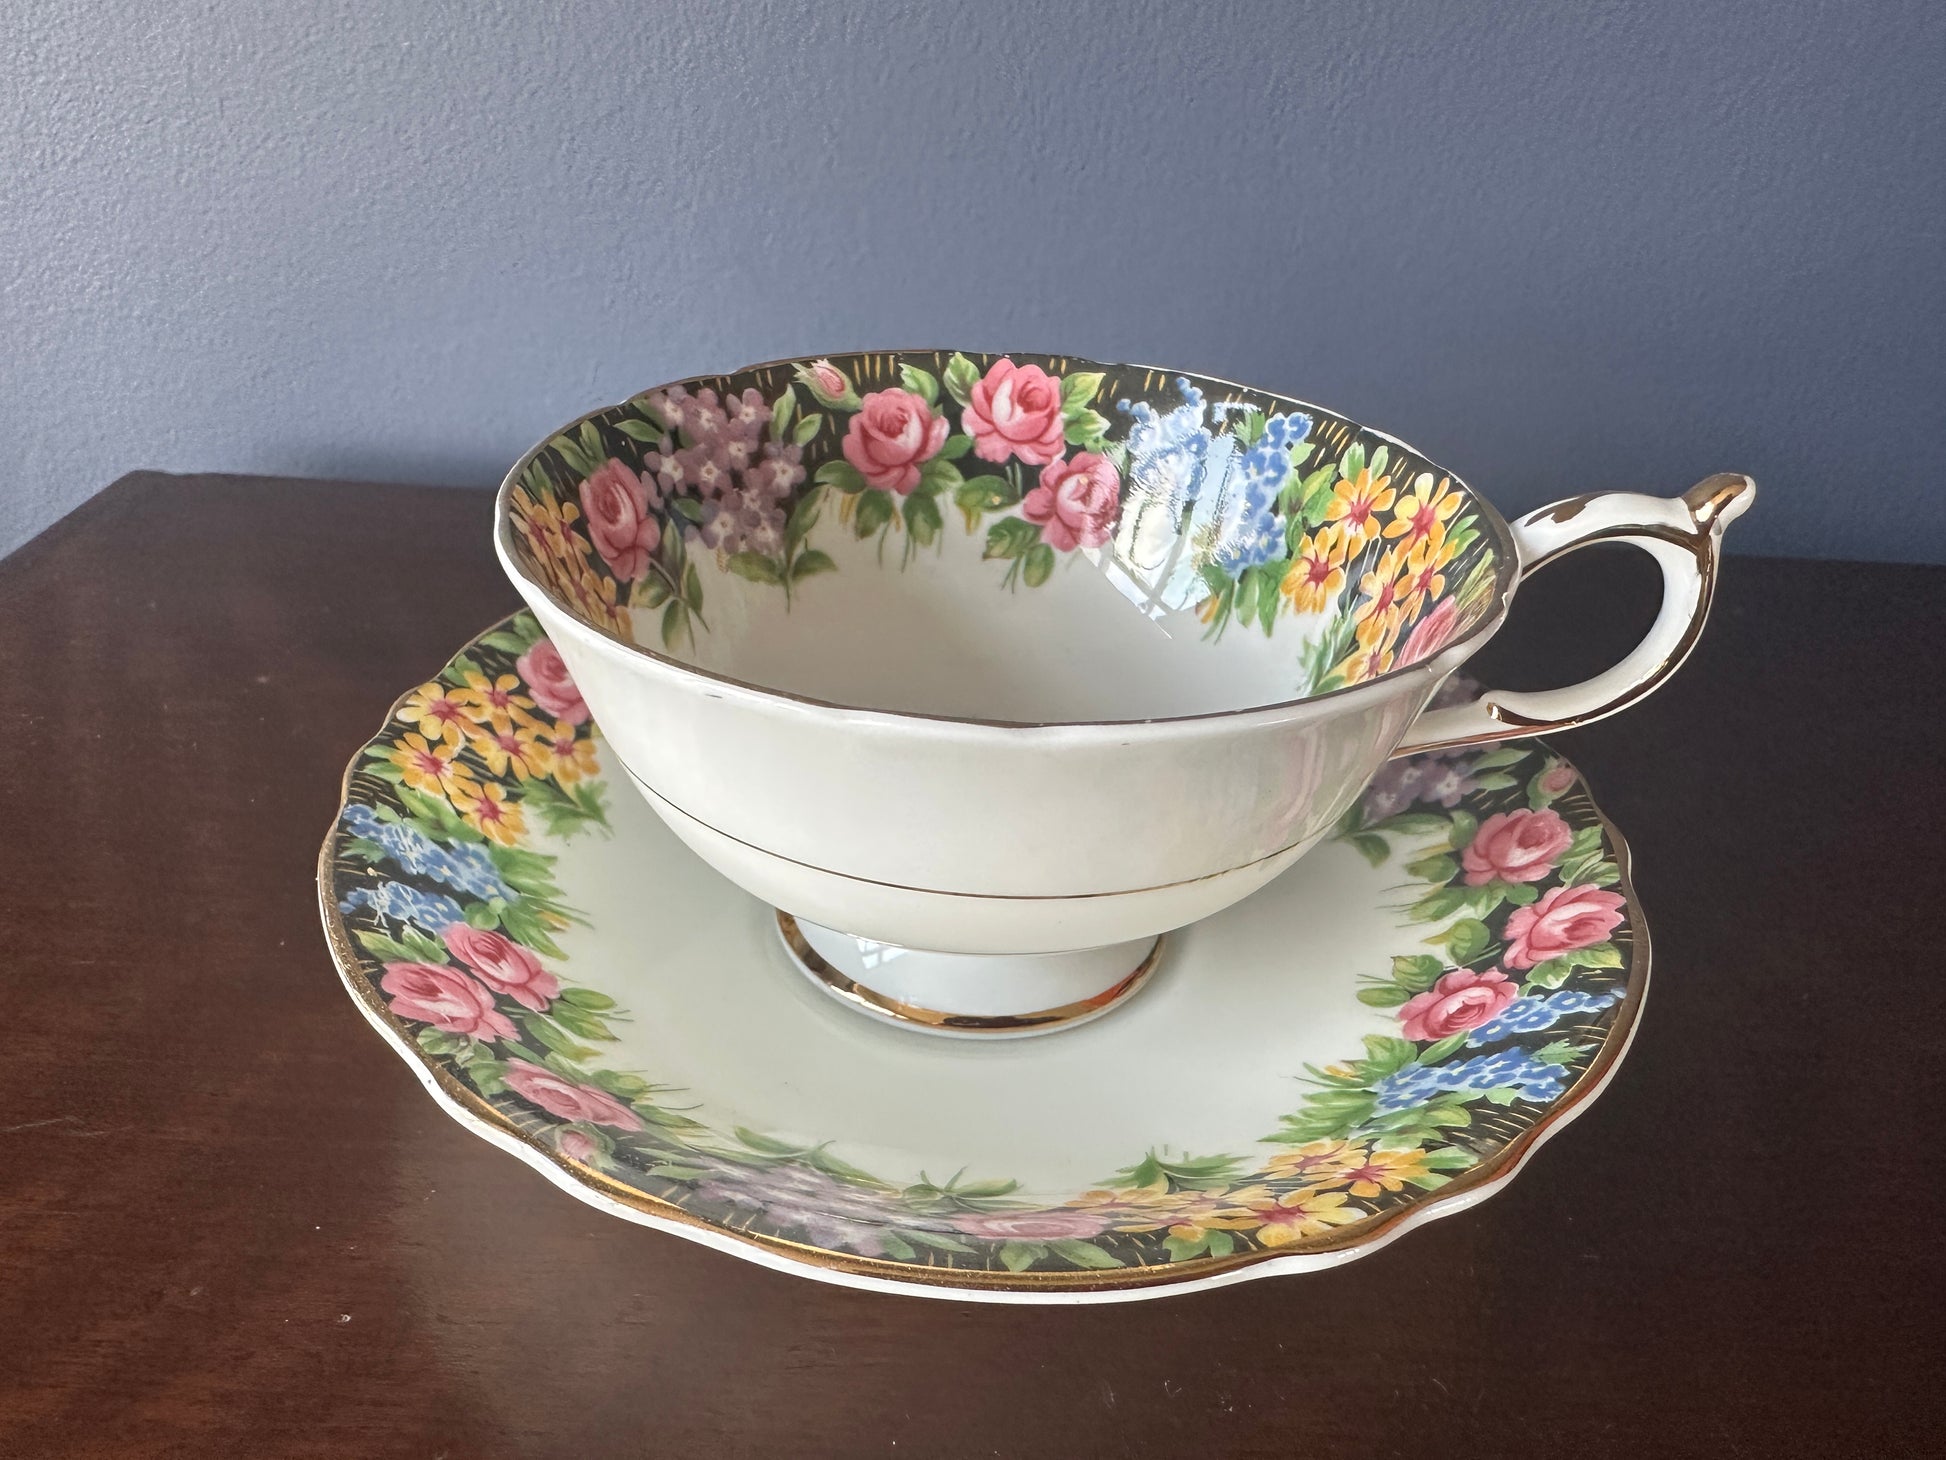 Paragon Double-Warranted Old English Garden Teacup and Saucer